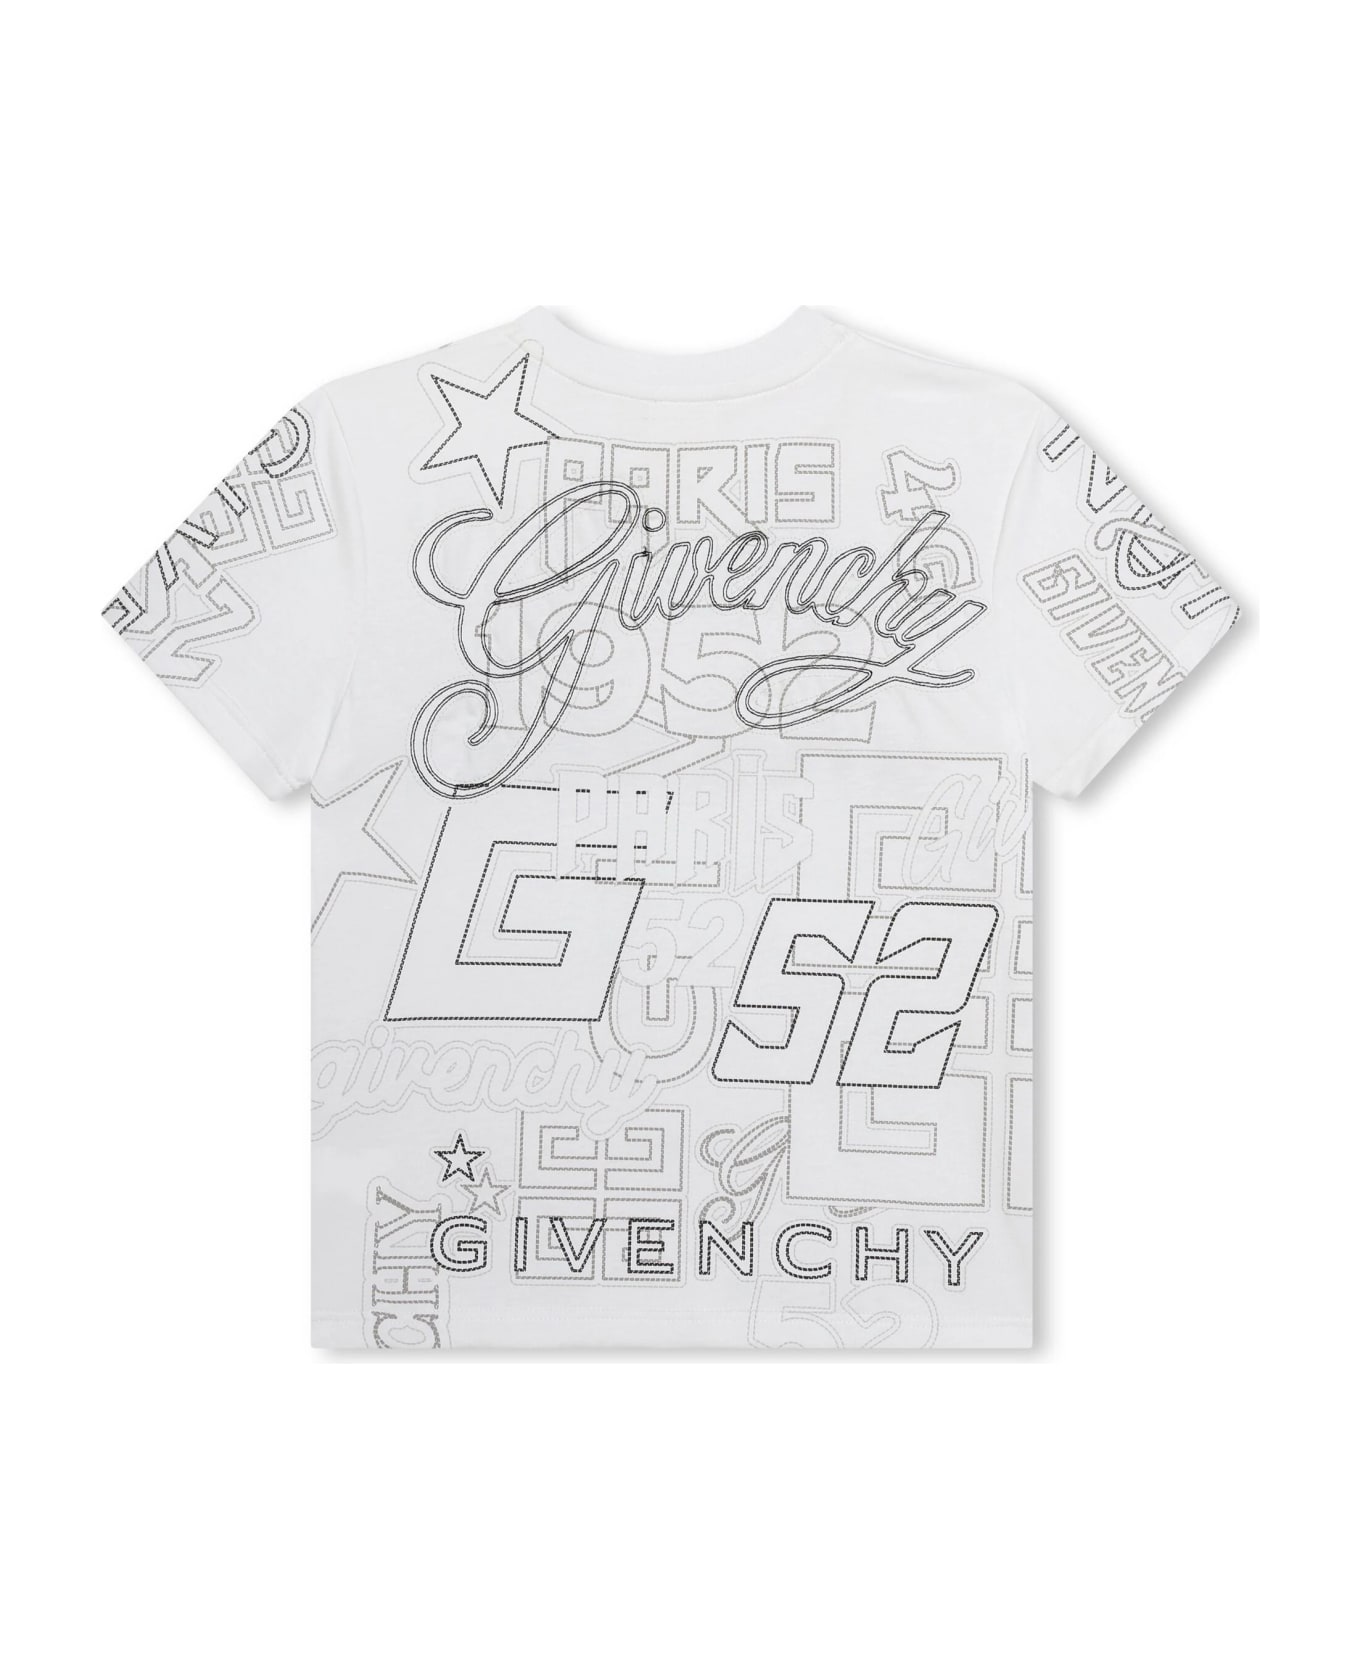 Givenchy White T-shirt With All-over Print - White